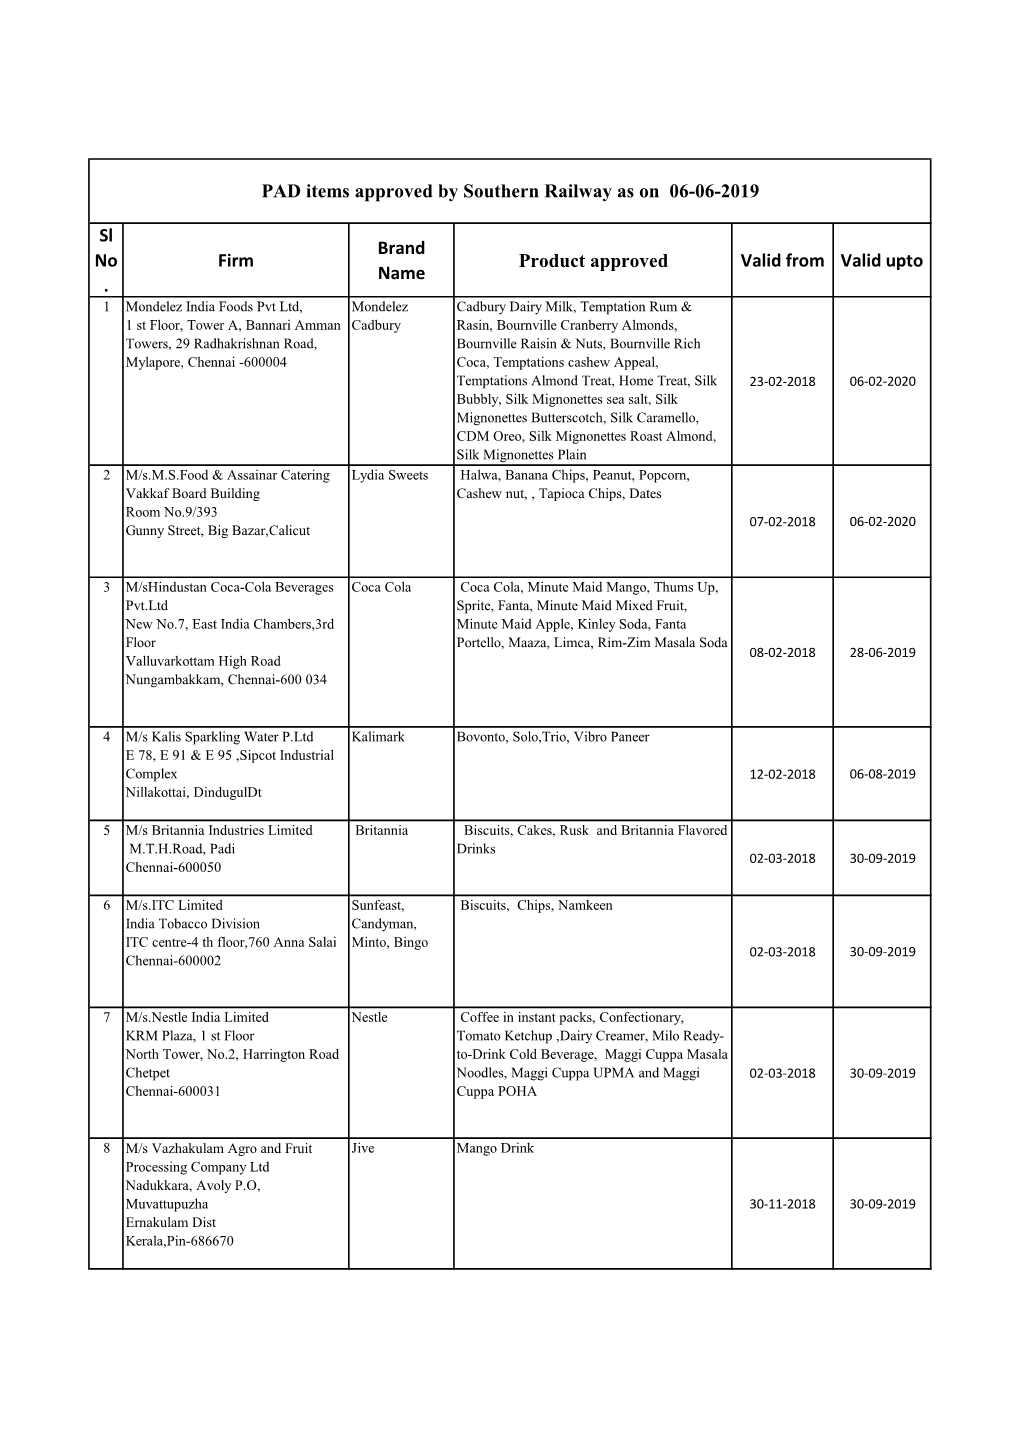 PAD Items Approved by Southern Railway As on 06-06-2019